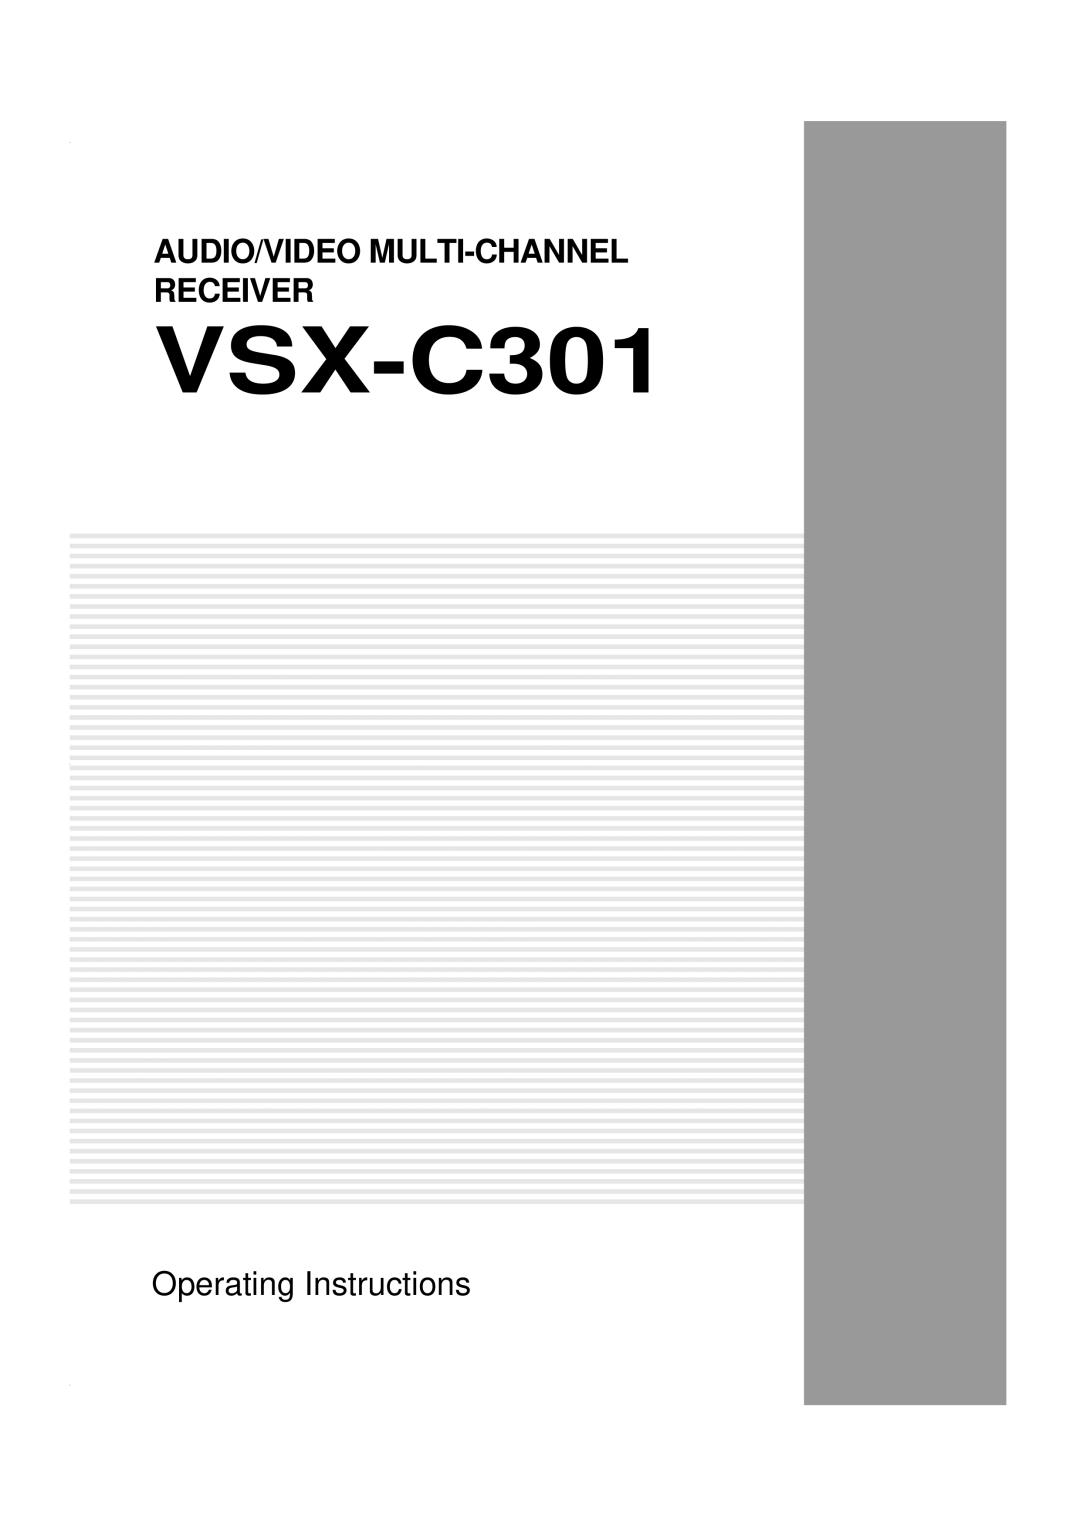 Pioneer VSX-C301 manual Audio/Video Multi-Channel Receiver, Operating Instructions 